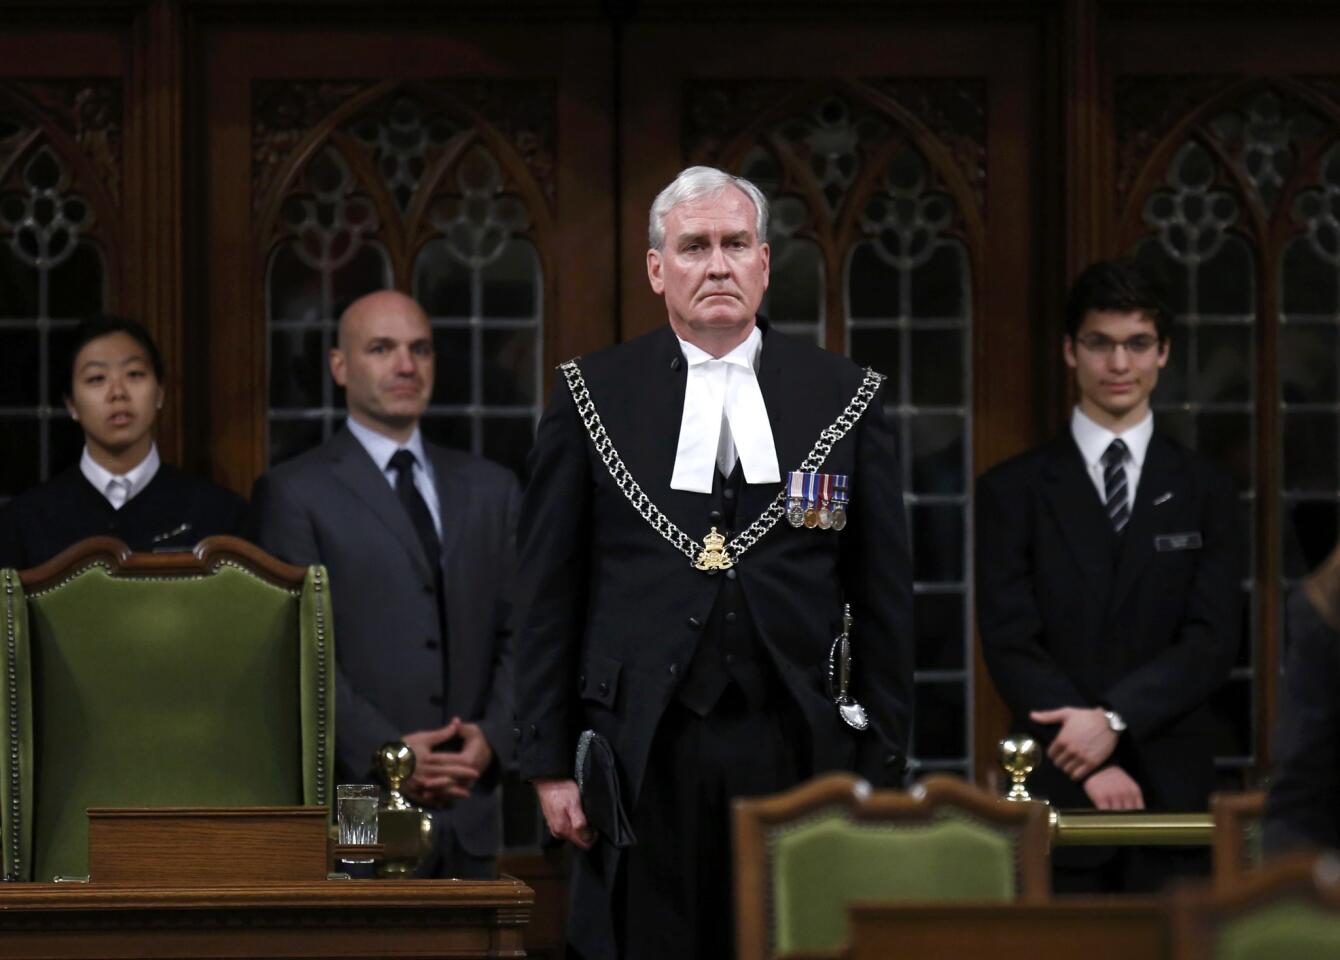 Canada mourns after Parliament shooting